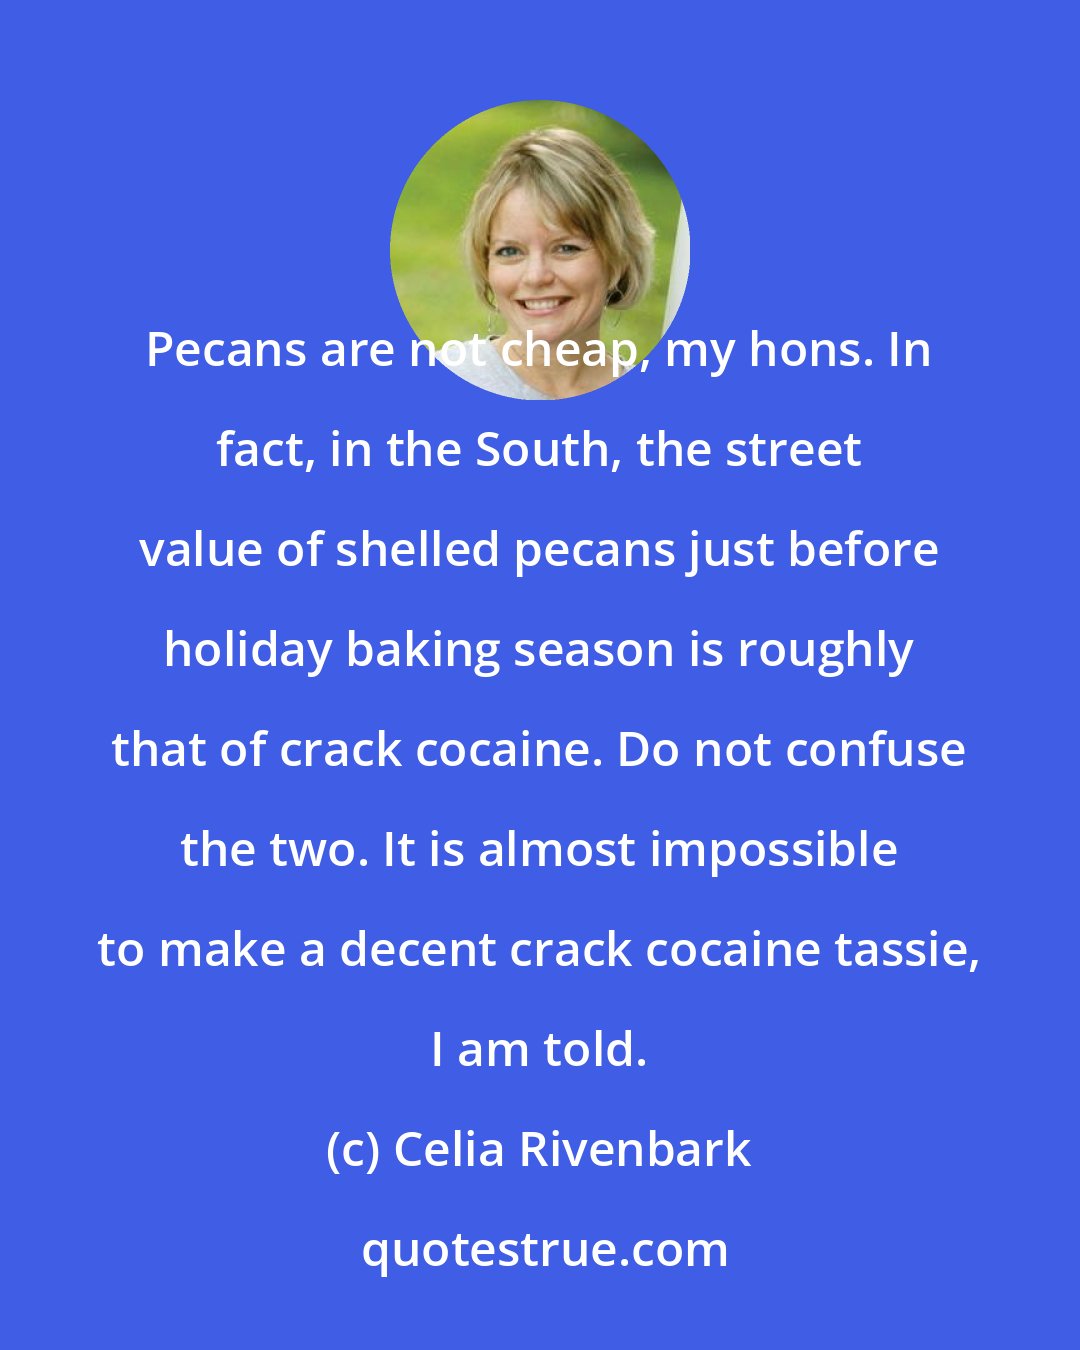 Celia Rivenbark: Pecans are not cheap, my hons. In fact, in the South, the street value of shelled pecans just before holiday baking season is roughly that of crack cocaine. Do not confuse the two. It is almost impossible to make a decent crack cocaine tassie, I am told.